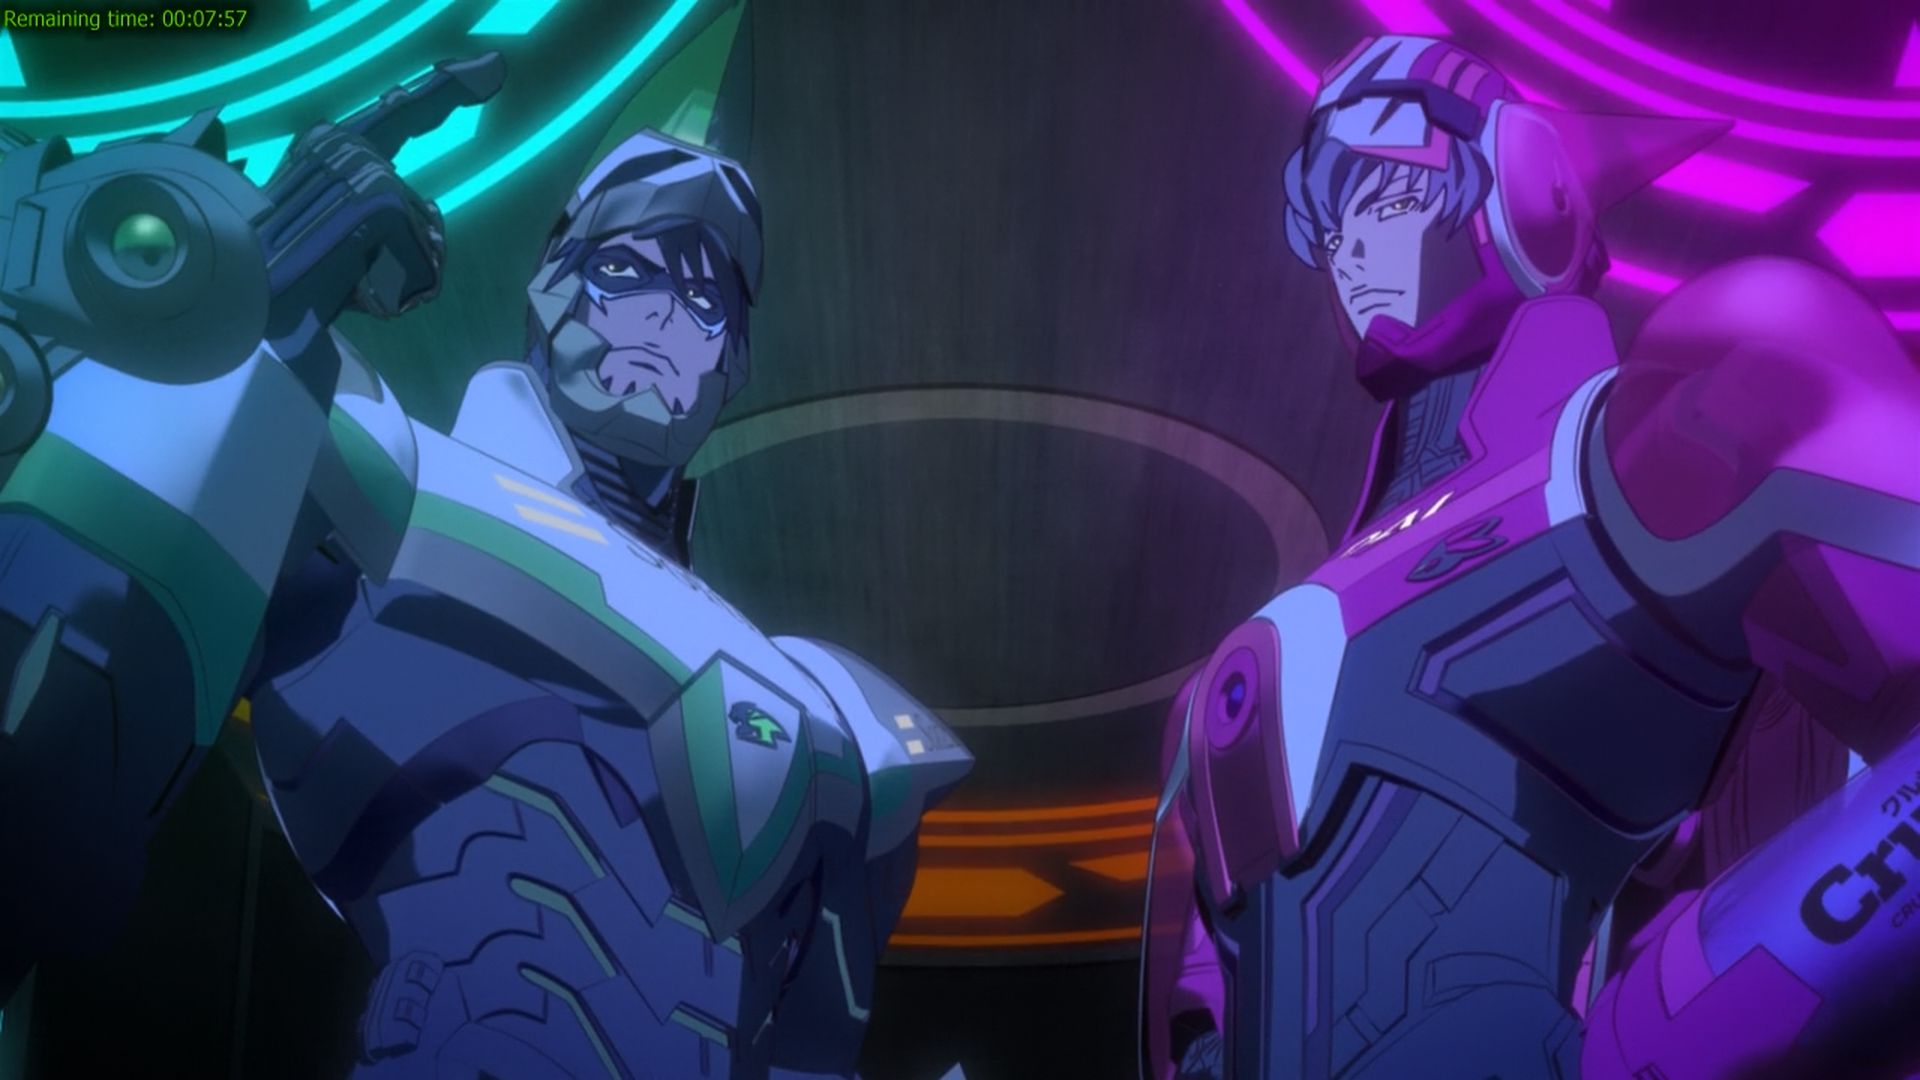 Review: Tiger and Bunny (タイガー＆バニー)